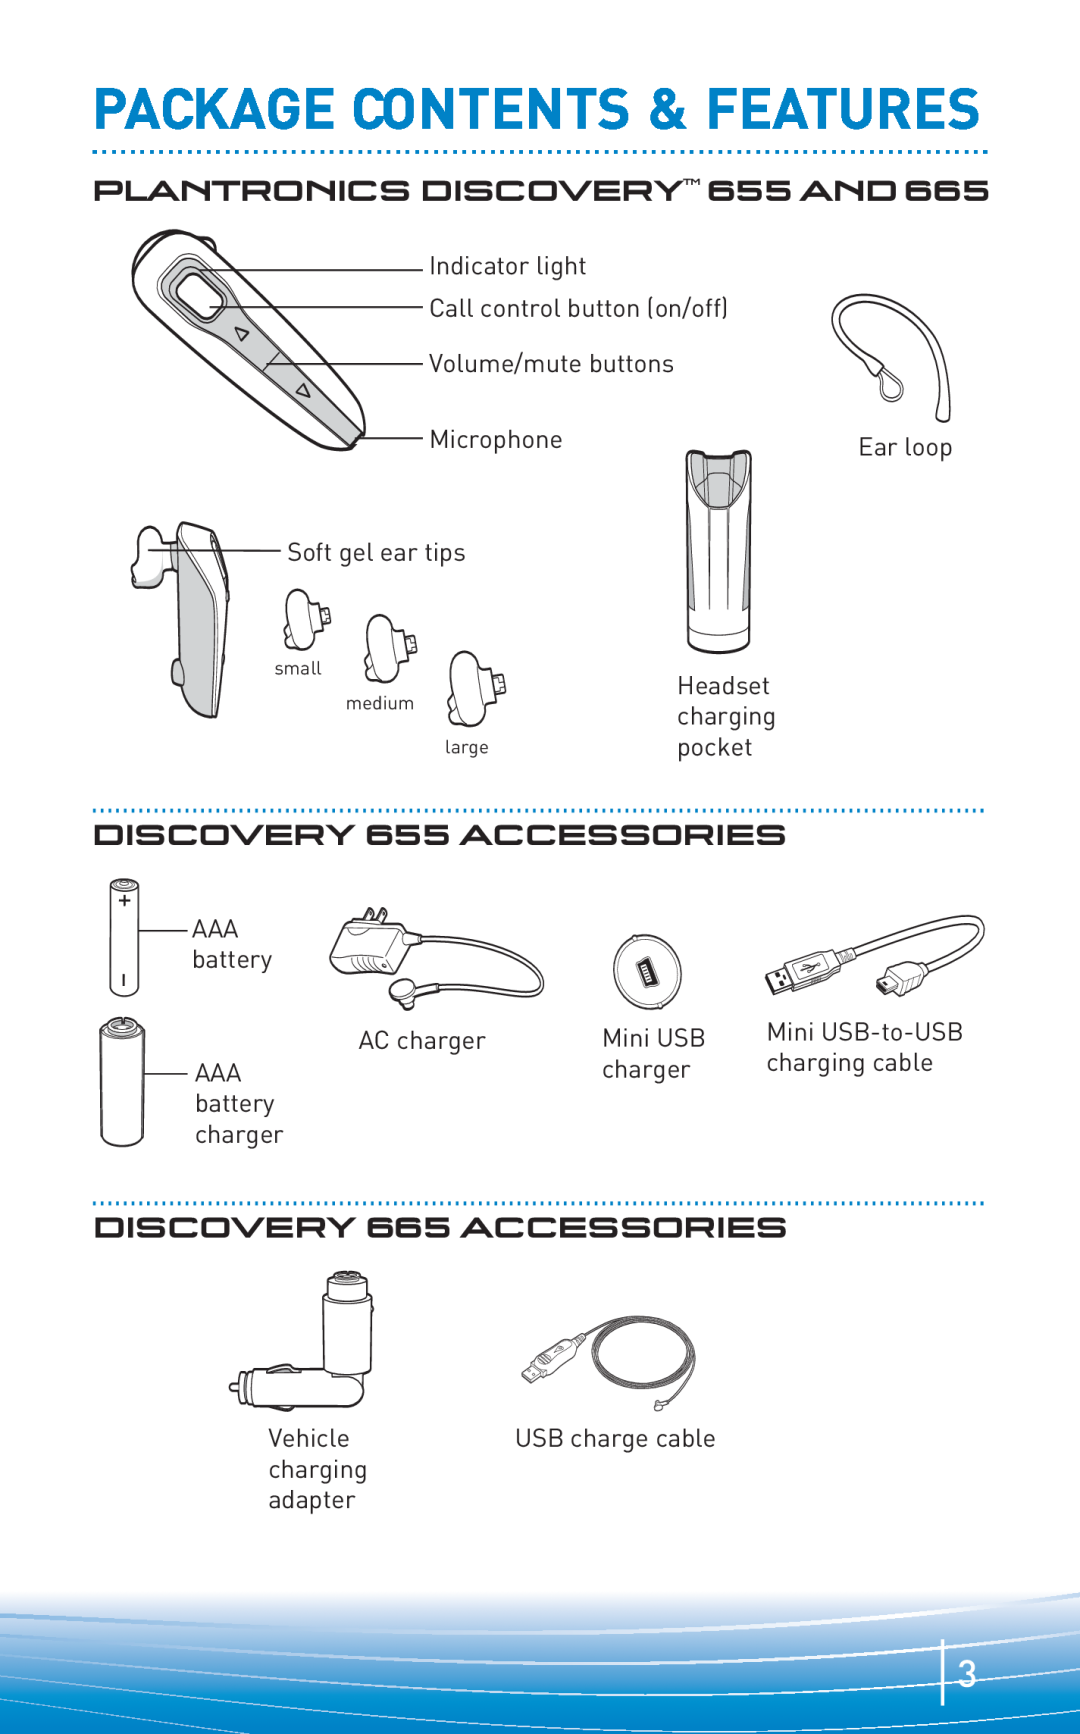 Plantronics manual Package Contents & Features, PLANTRONICS DISCOVERYTM 655AND665, DISCOVERY 655ACCESSORIES 